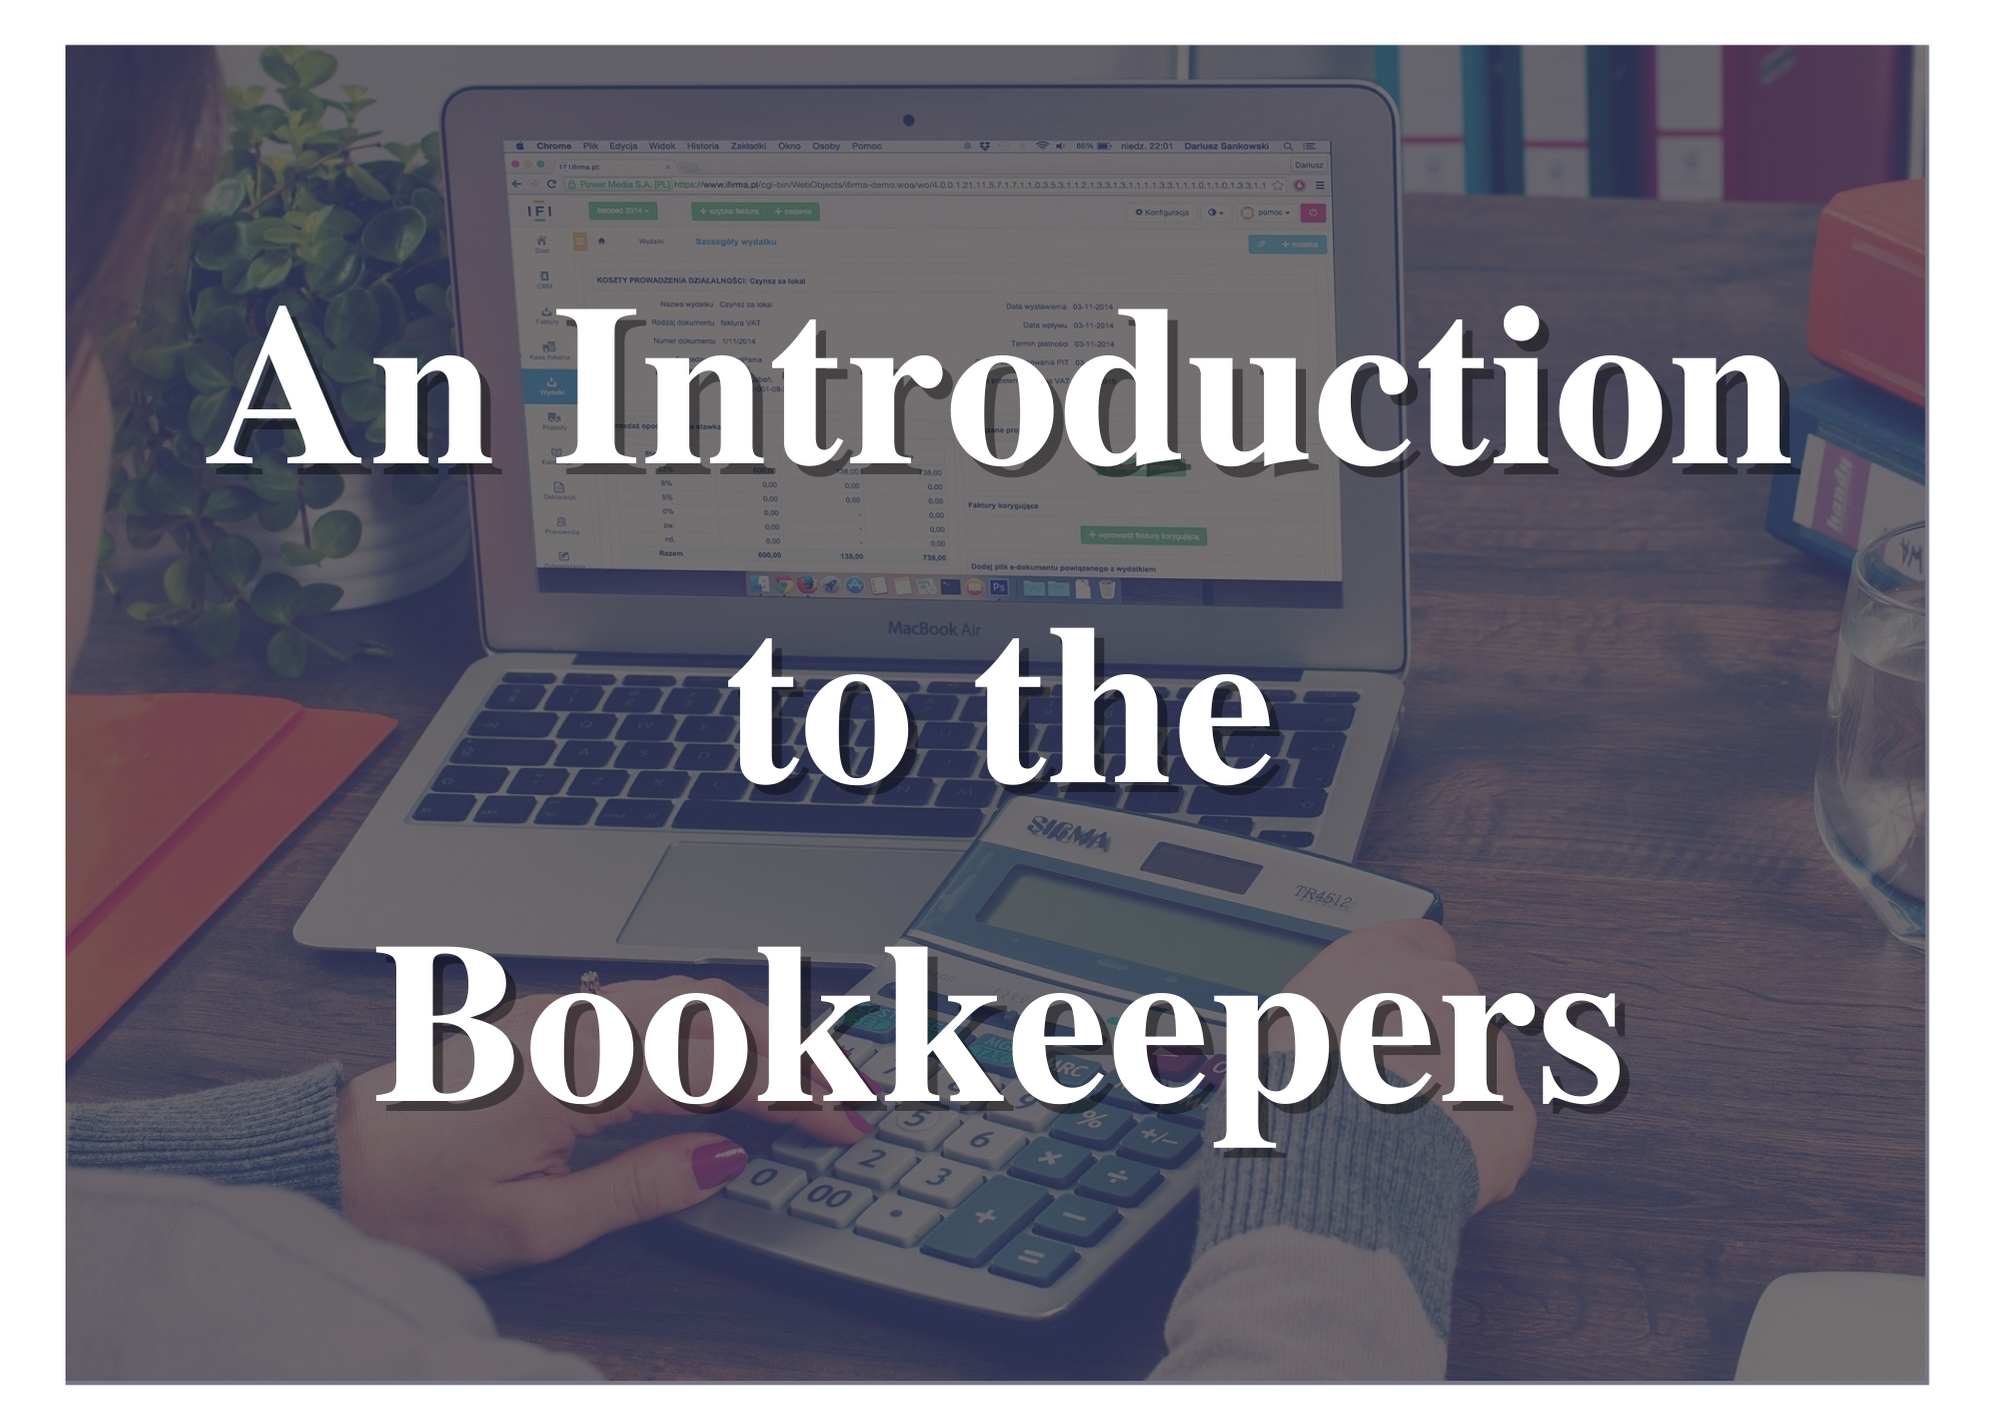 Click here to learn more about VRB's Bookkeepers